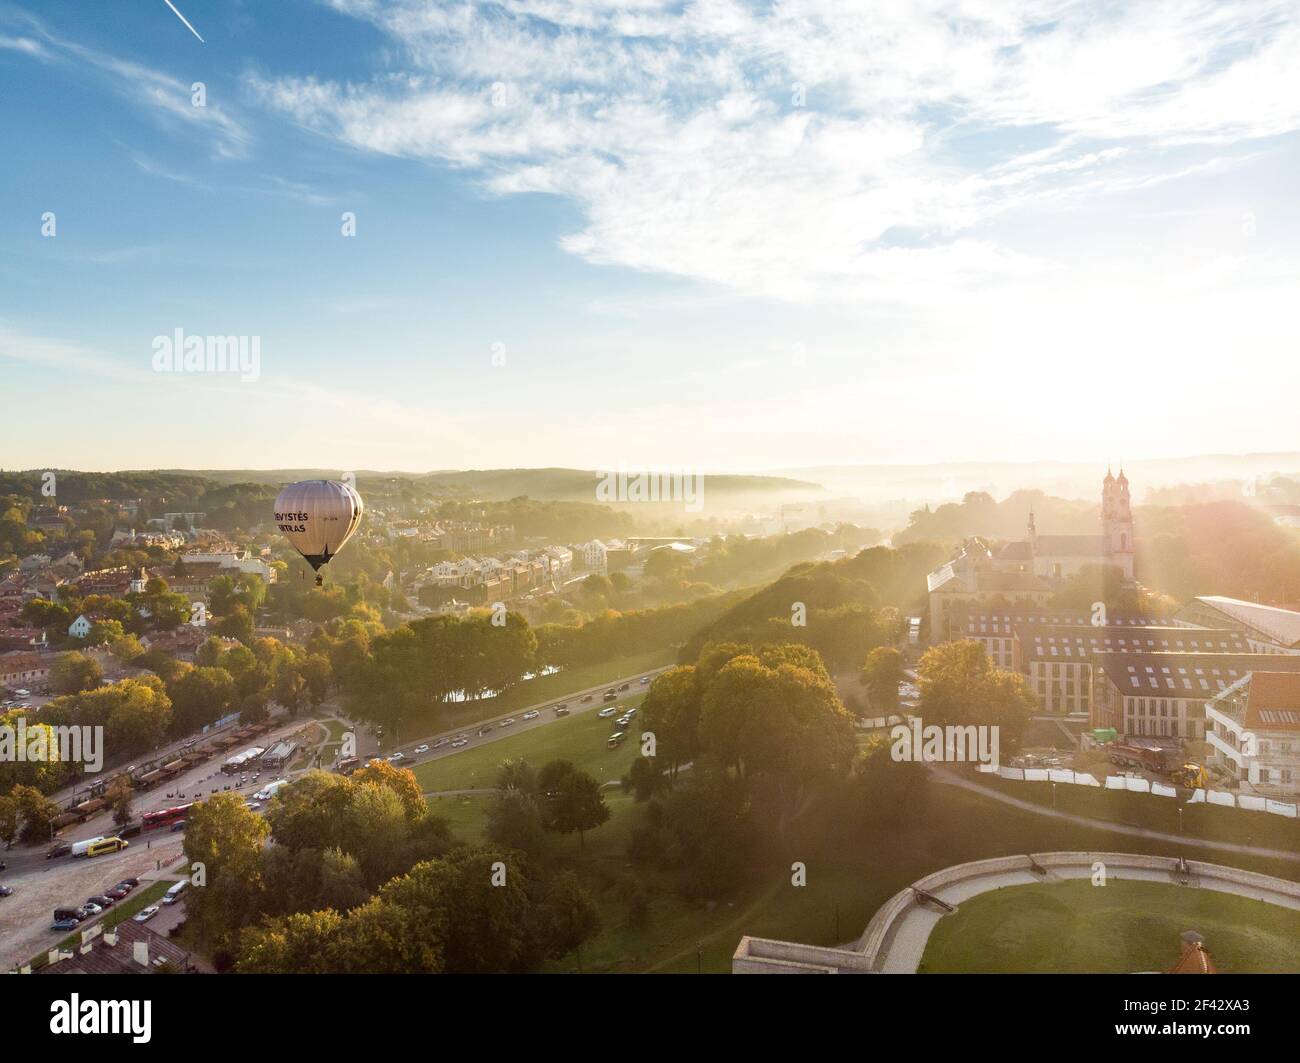 VILNIUS, LITHUANIA - AUGUST 20, 2020: Colorful hot air balloons taking off in Old town of Vilnius city on sunny summer morning. Lots of people watchin Stock Photo